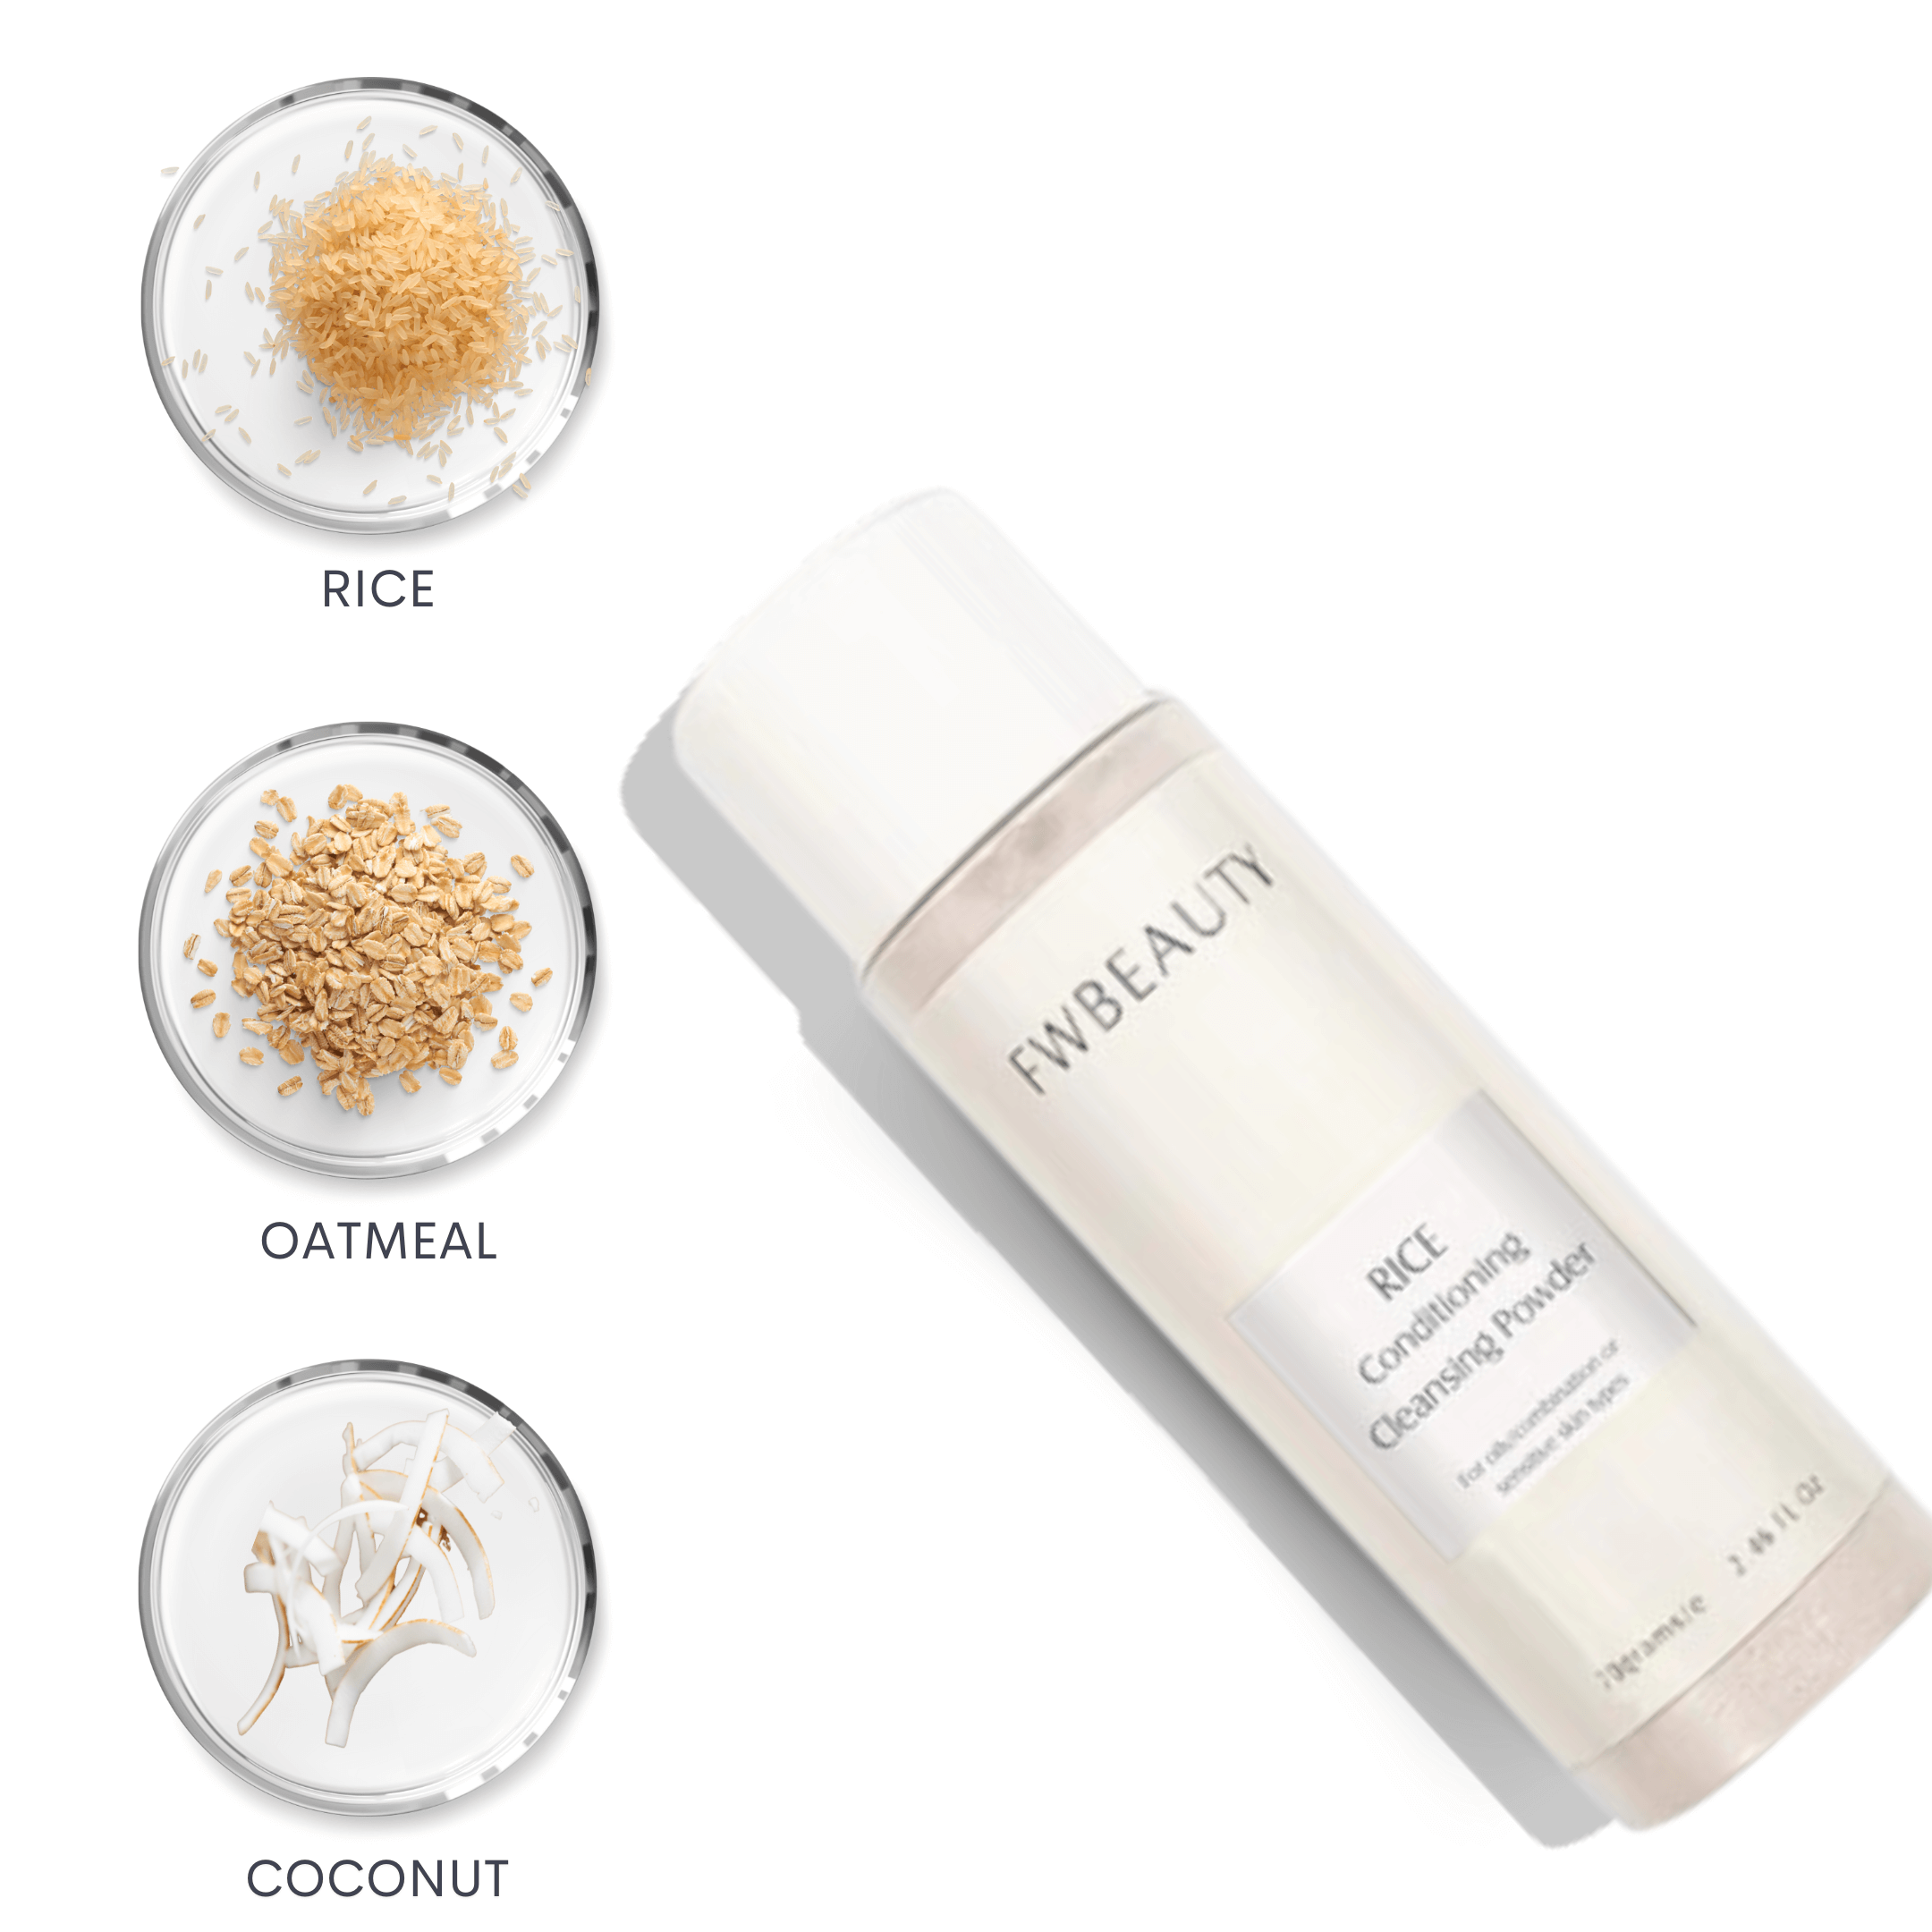 Rice Conditioning Powder FWBEAUTY